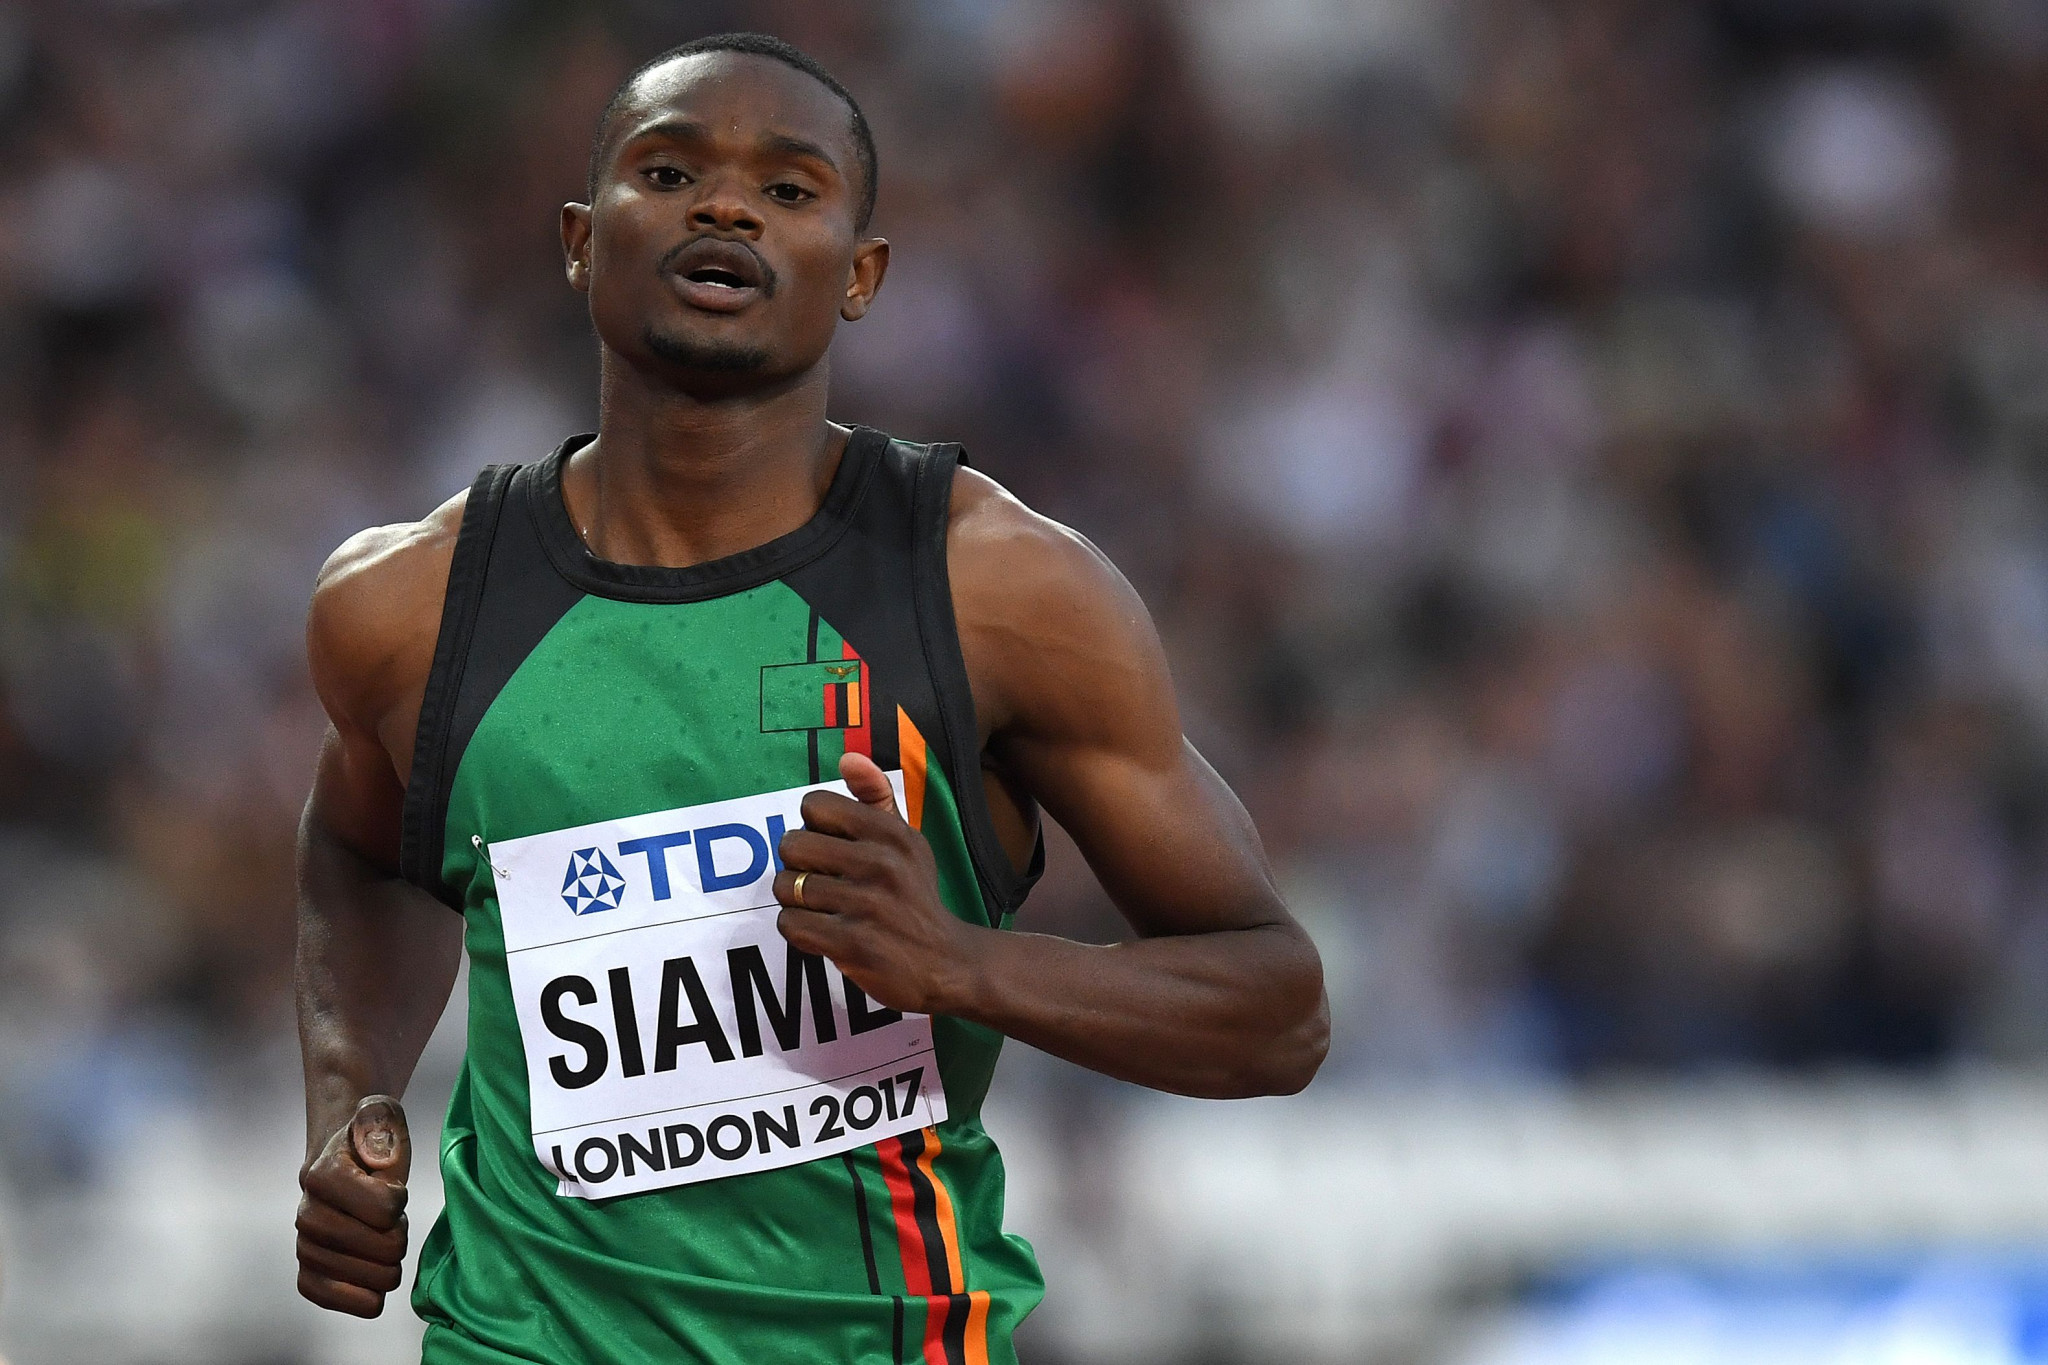 Sydney Siame is the reigning African Games champion over 200 metres ©Getty Images